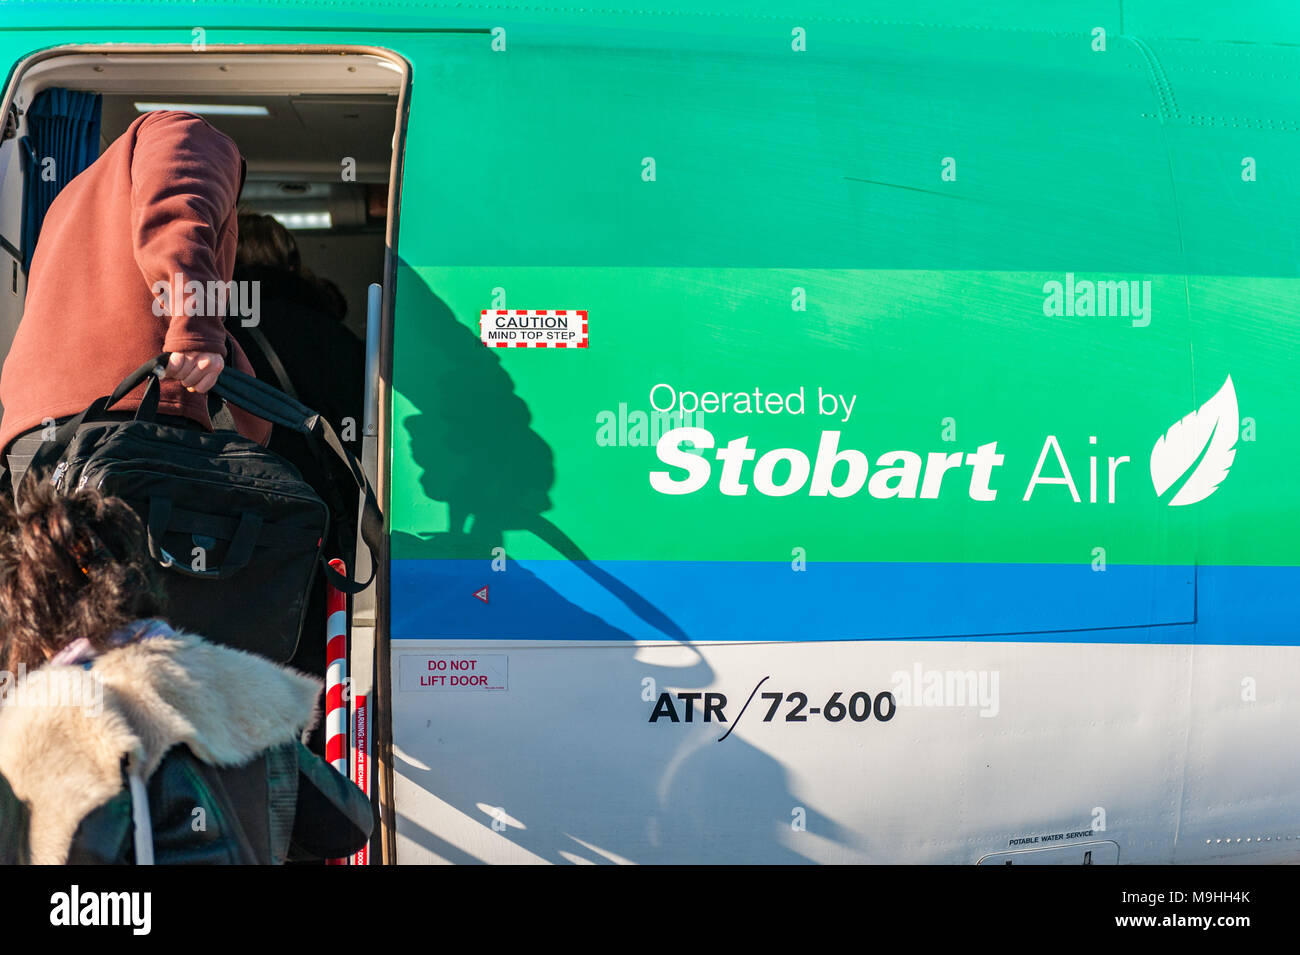 Passengers board an Aer Lingus/Stobart Air ATR 72-600 aircraft at Birmingham Airport heading to Cork, Ireland with copy space. Stock Photo